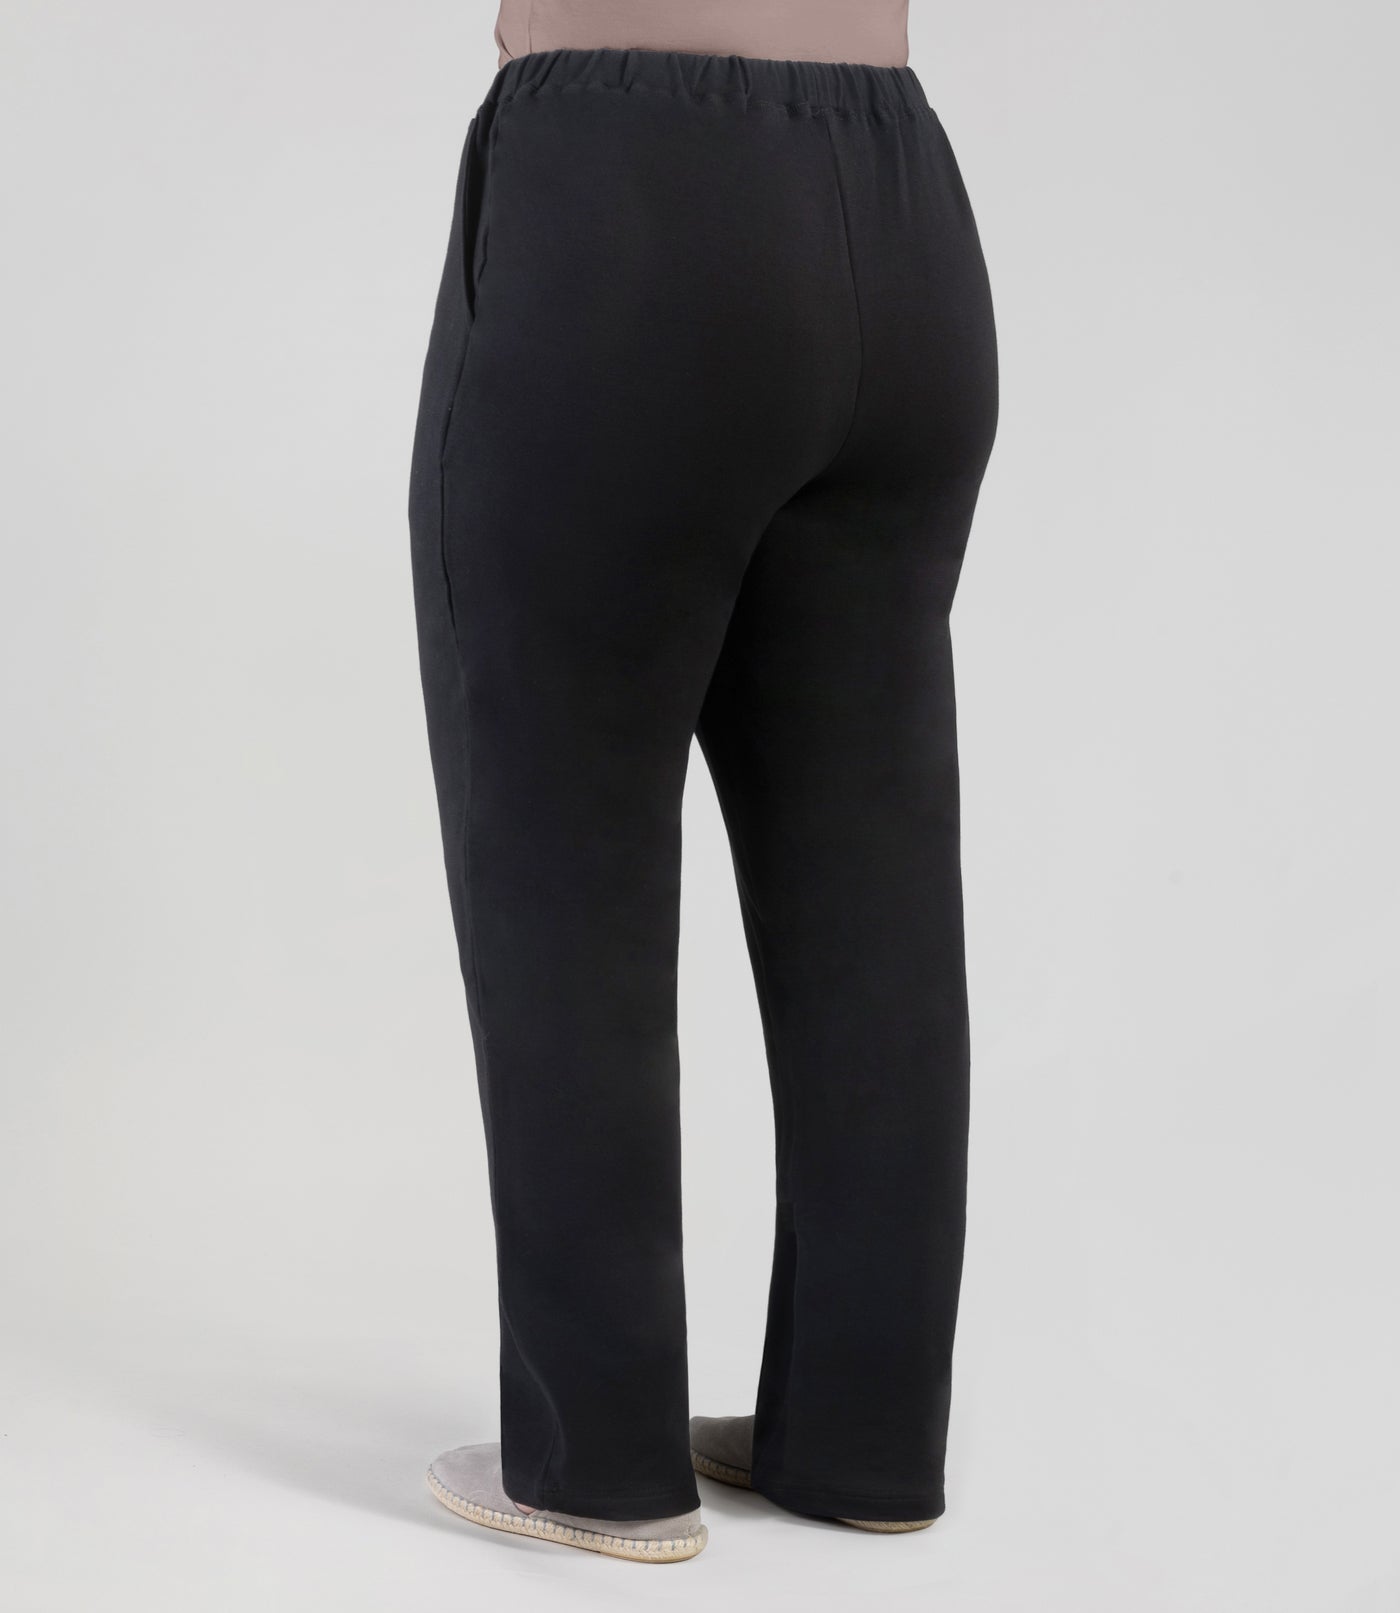 Plus size woman facing back, wearing JunoActive's MaVie Pocketed Pant in black. One hand is in pocket and other is by side.